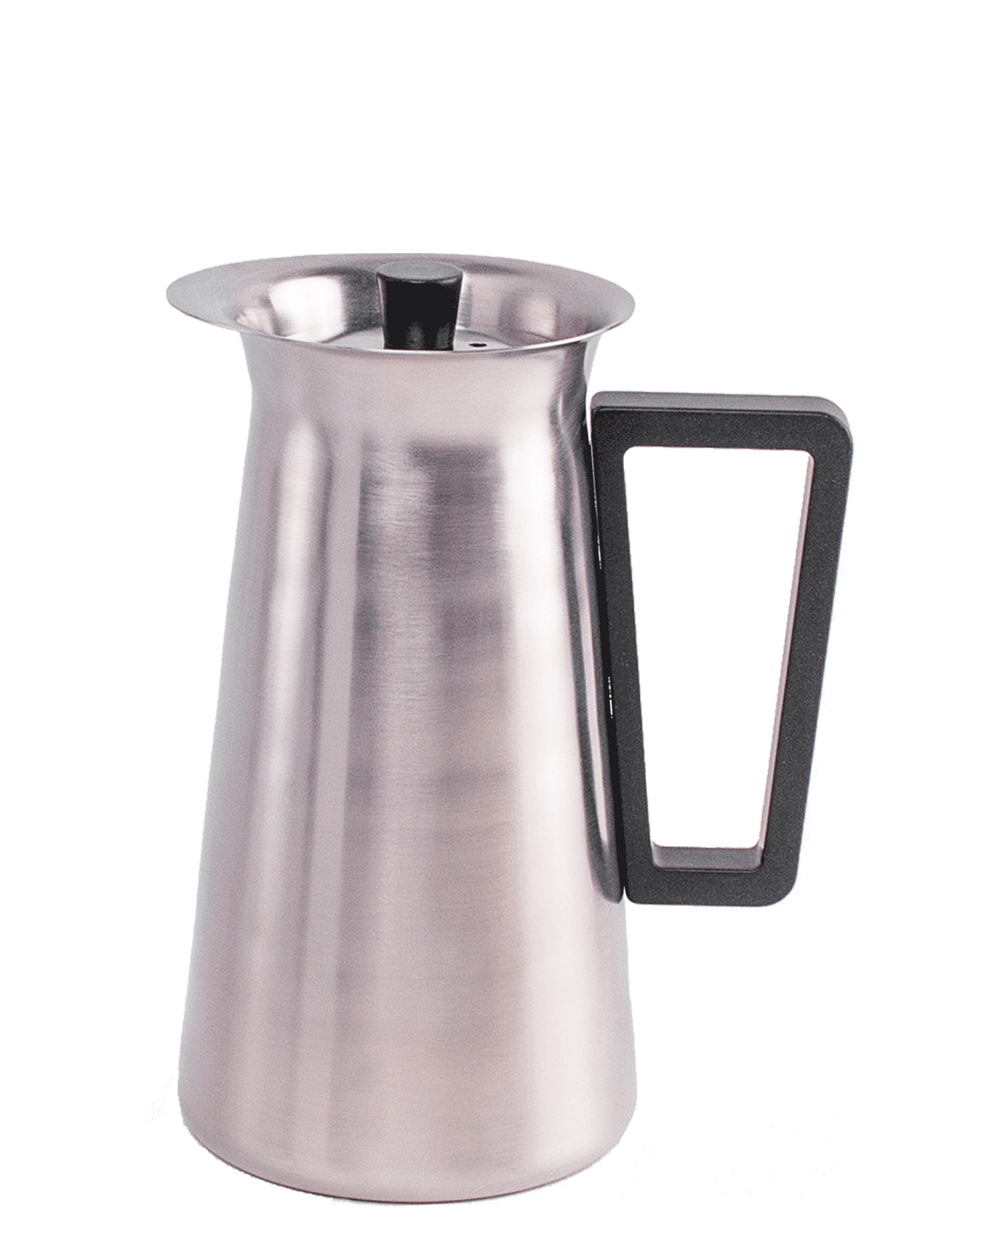 https://cdn.shopify.com/s/files/1/0689/4089/0413/products/Tiipot_stainlessteel_1.2l_lr_1000x.png?v=1680346324